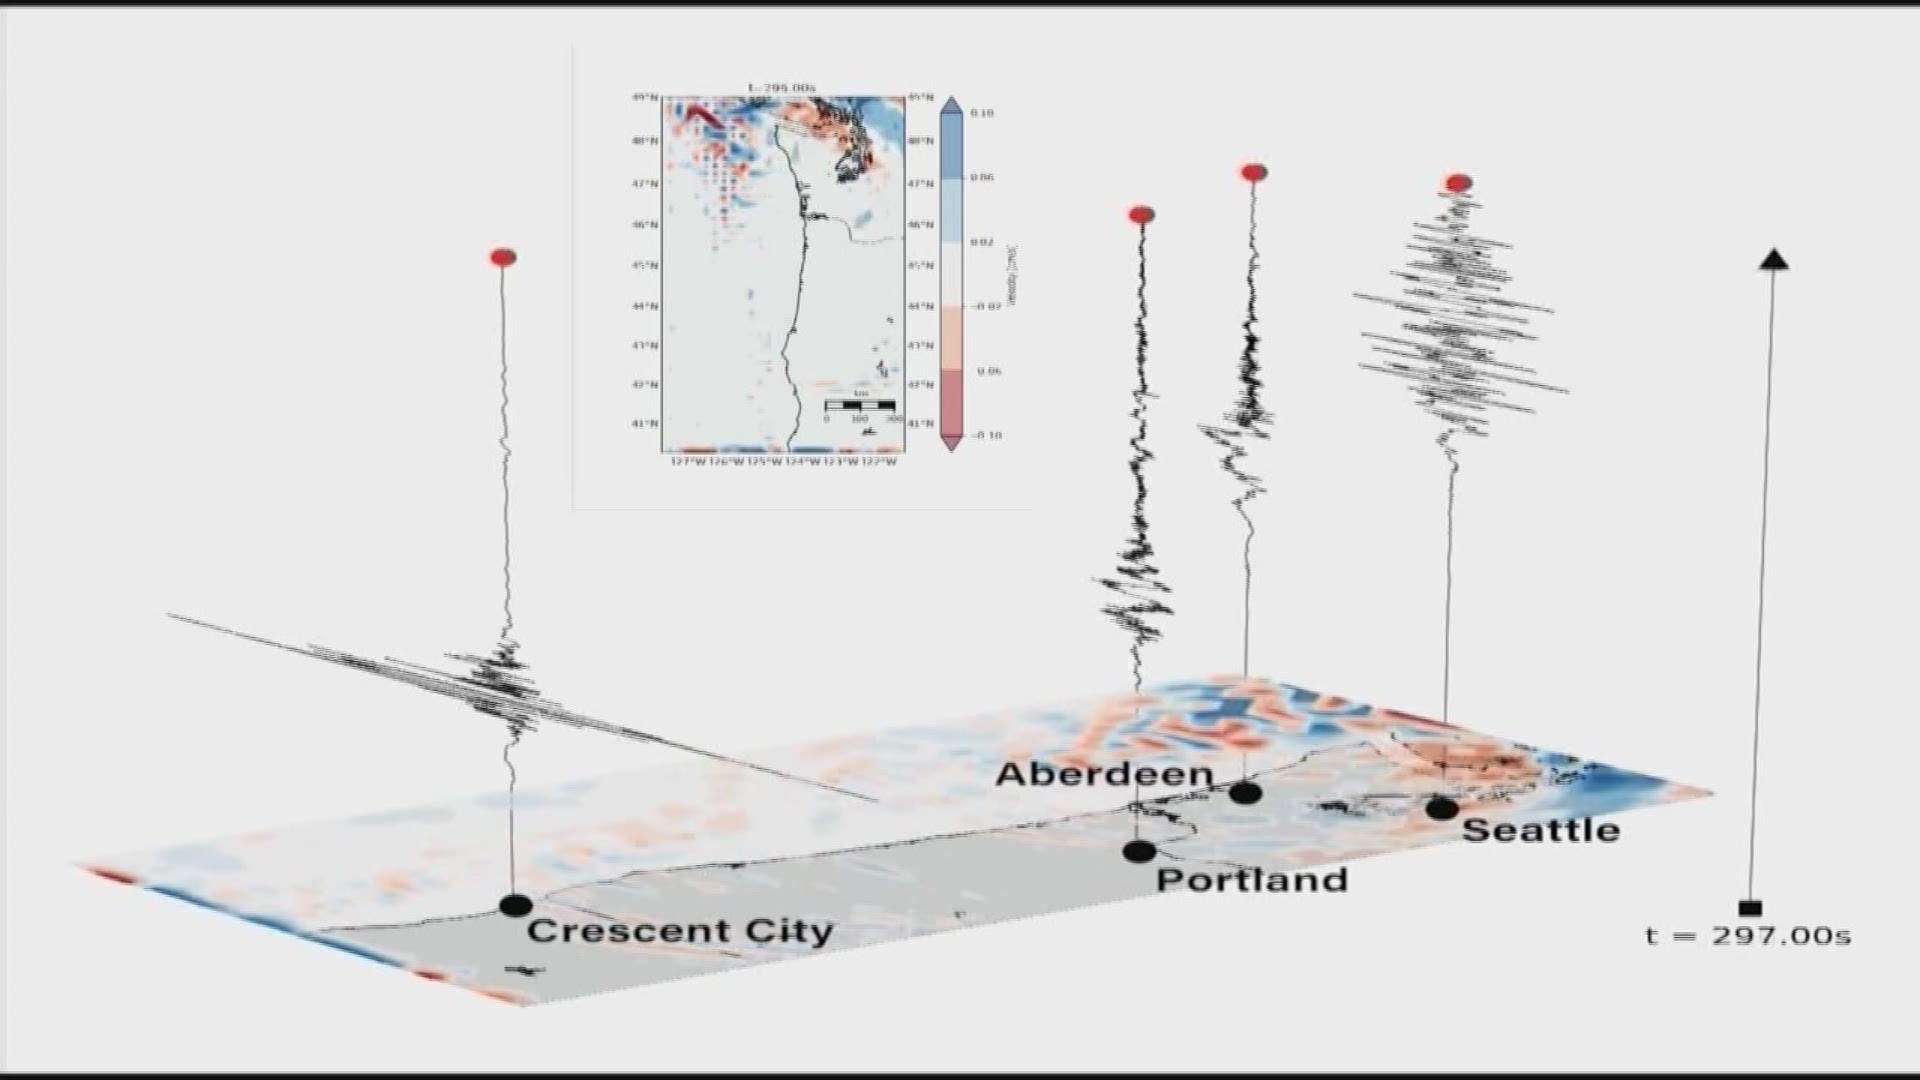 Shaking from further away could be more violent for Seattle and it’s suborns than closer in during a magnitude 9 earthquake from the Cascadia Subduction Zone.